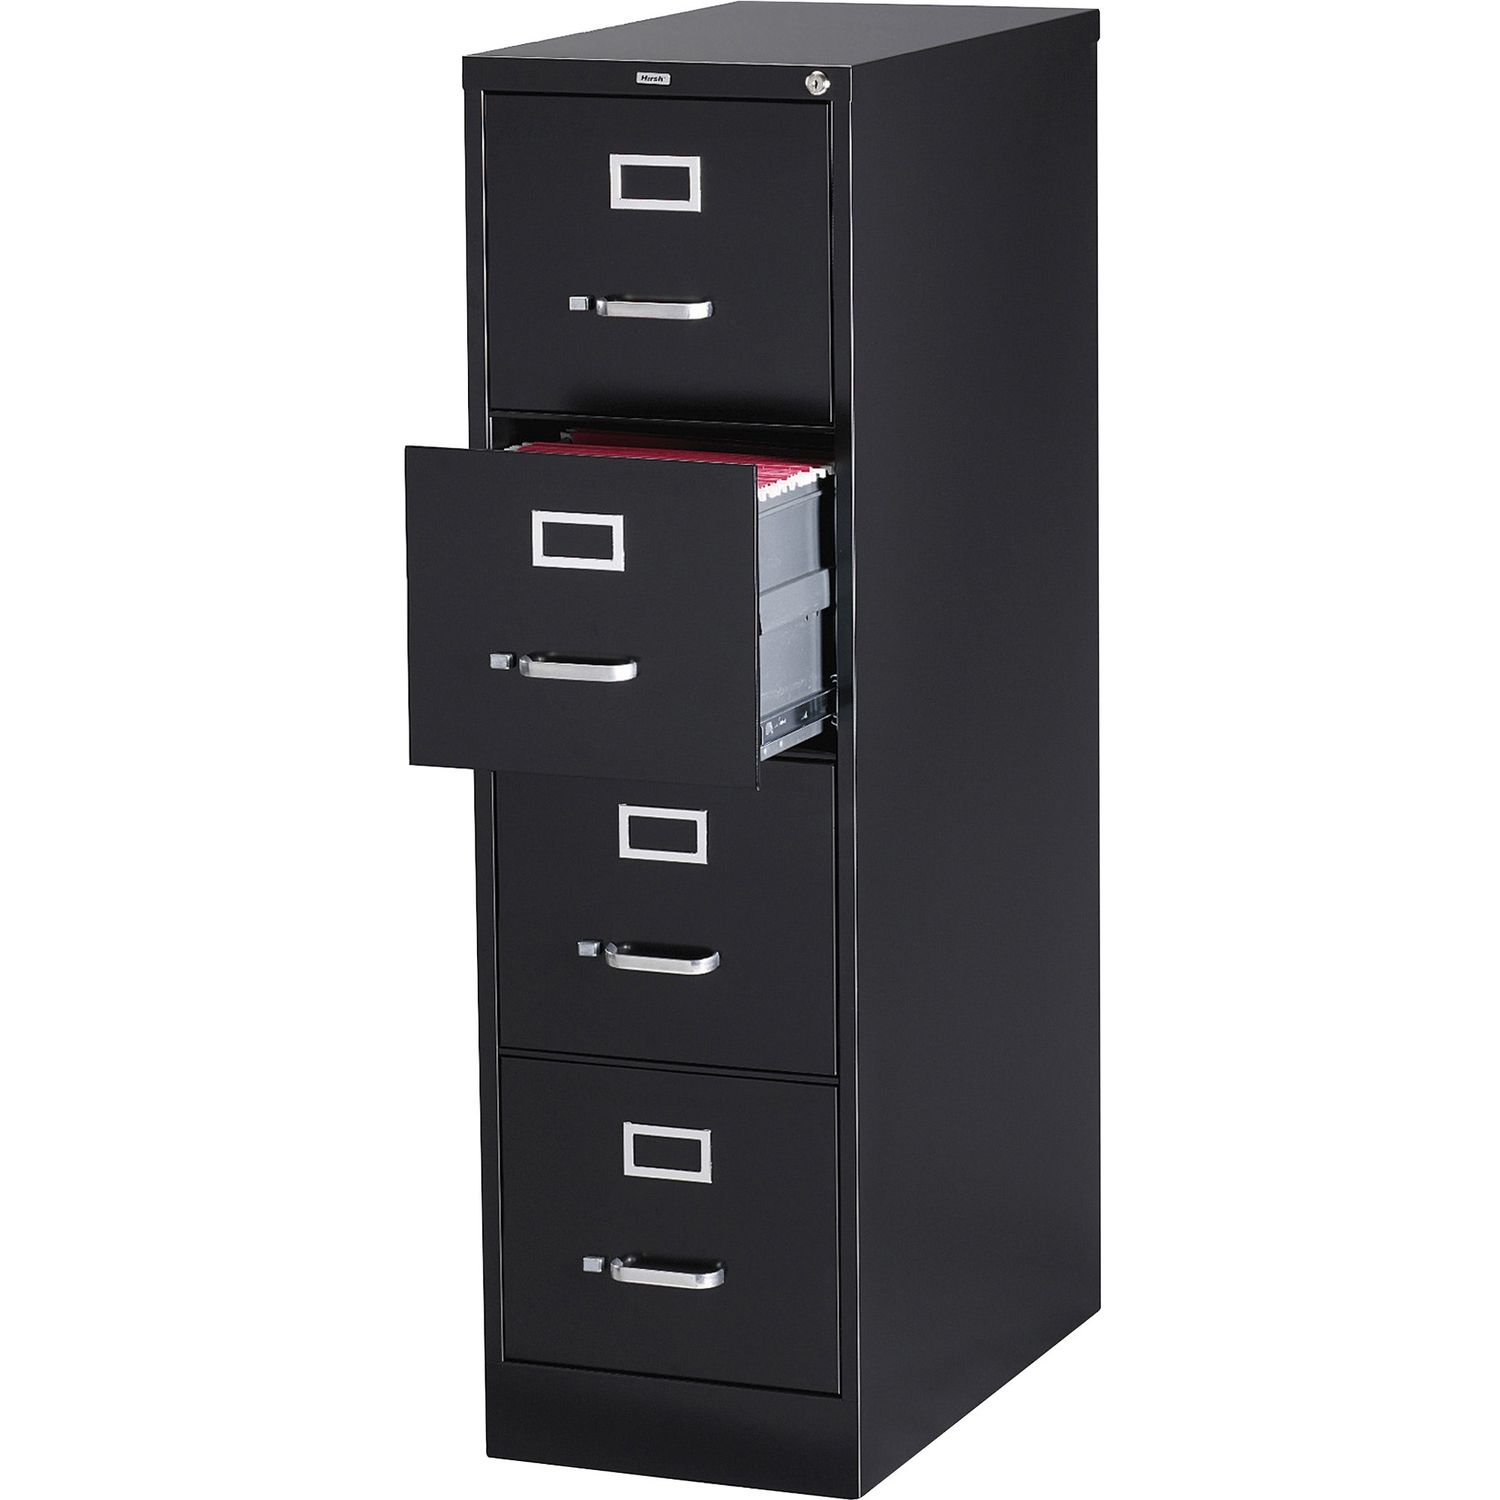 Vertical file - 4-Drawer 15" x 26.5" x 52", 4 x Drawer(s) for File, Letter, Vertical, Security Lock, Ball-bearing Suspension, Heavy Duty, Black, Steel, Recycled